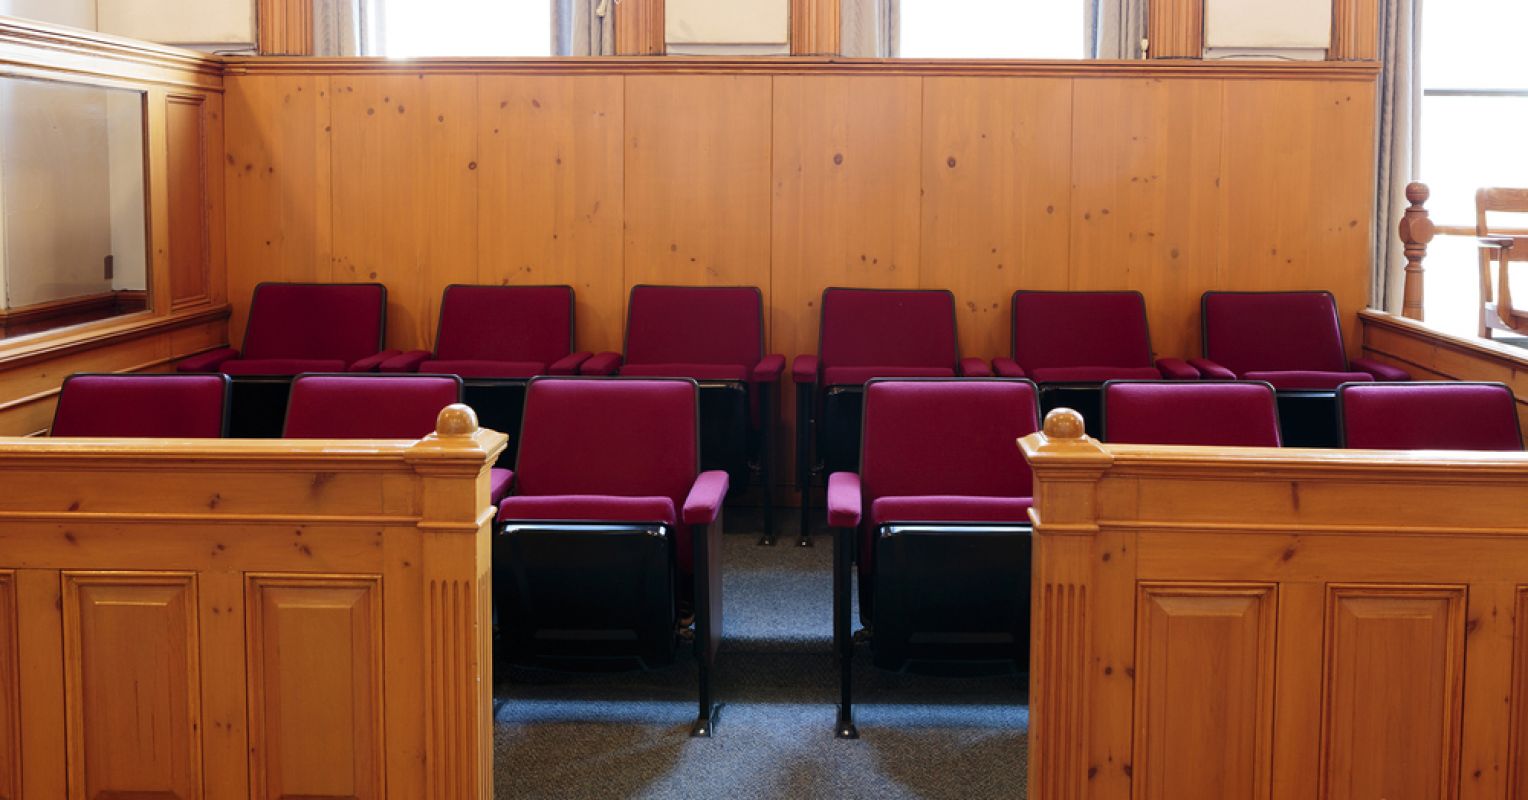 Racism May Be Built Into Some Courtrooms